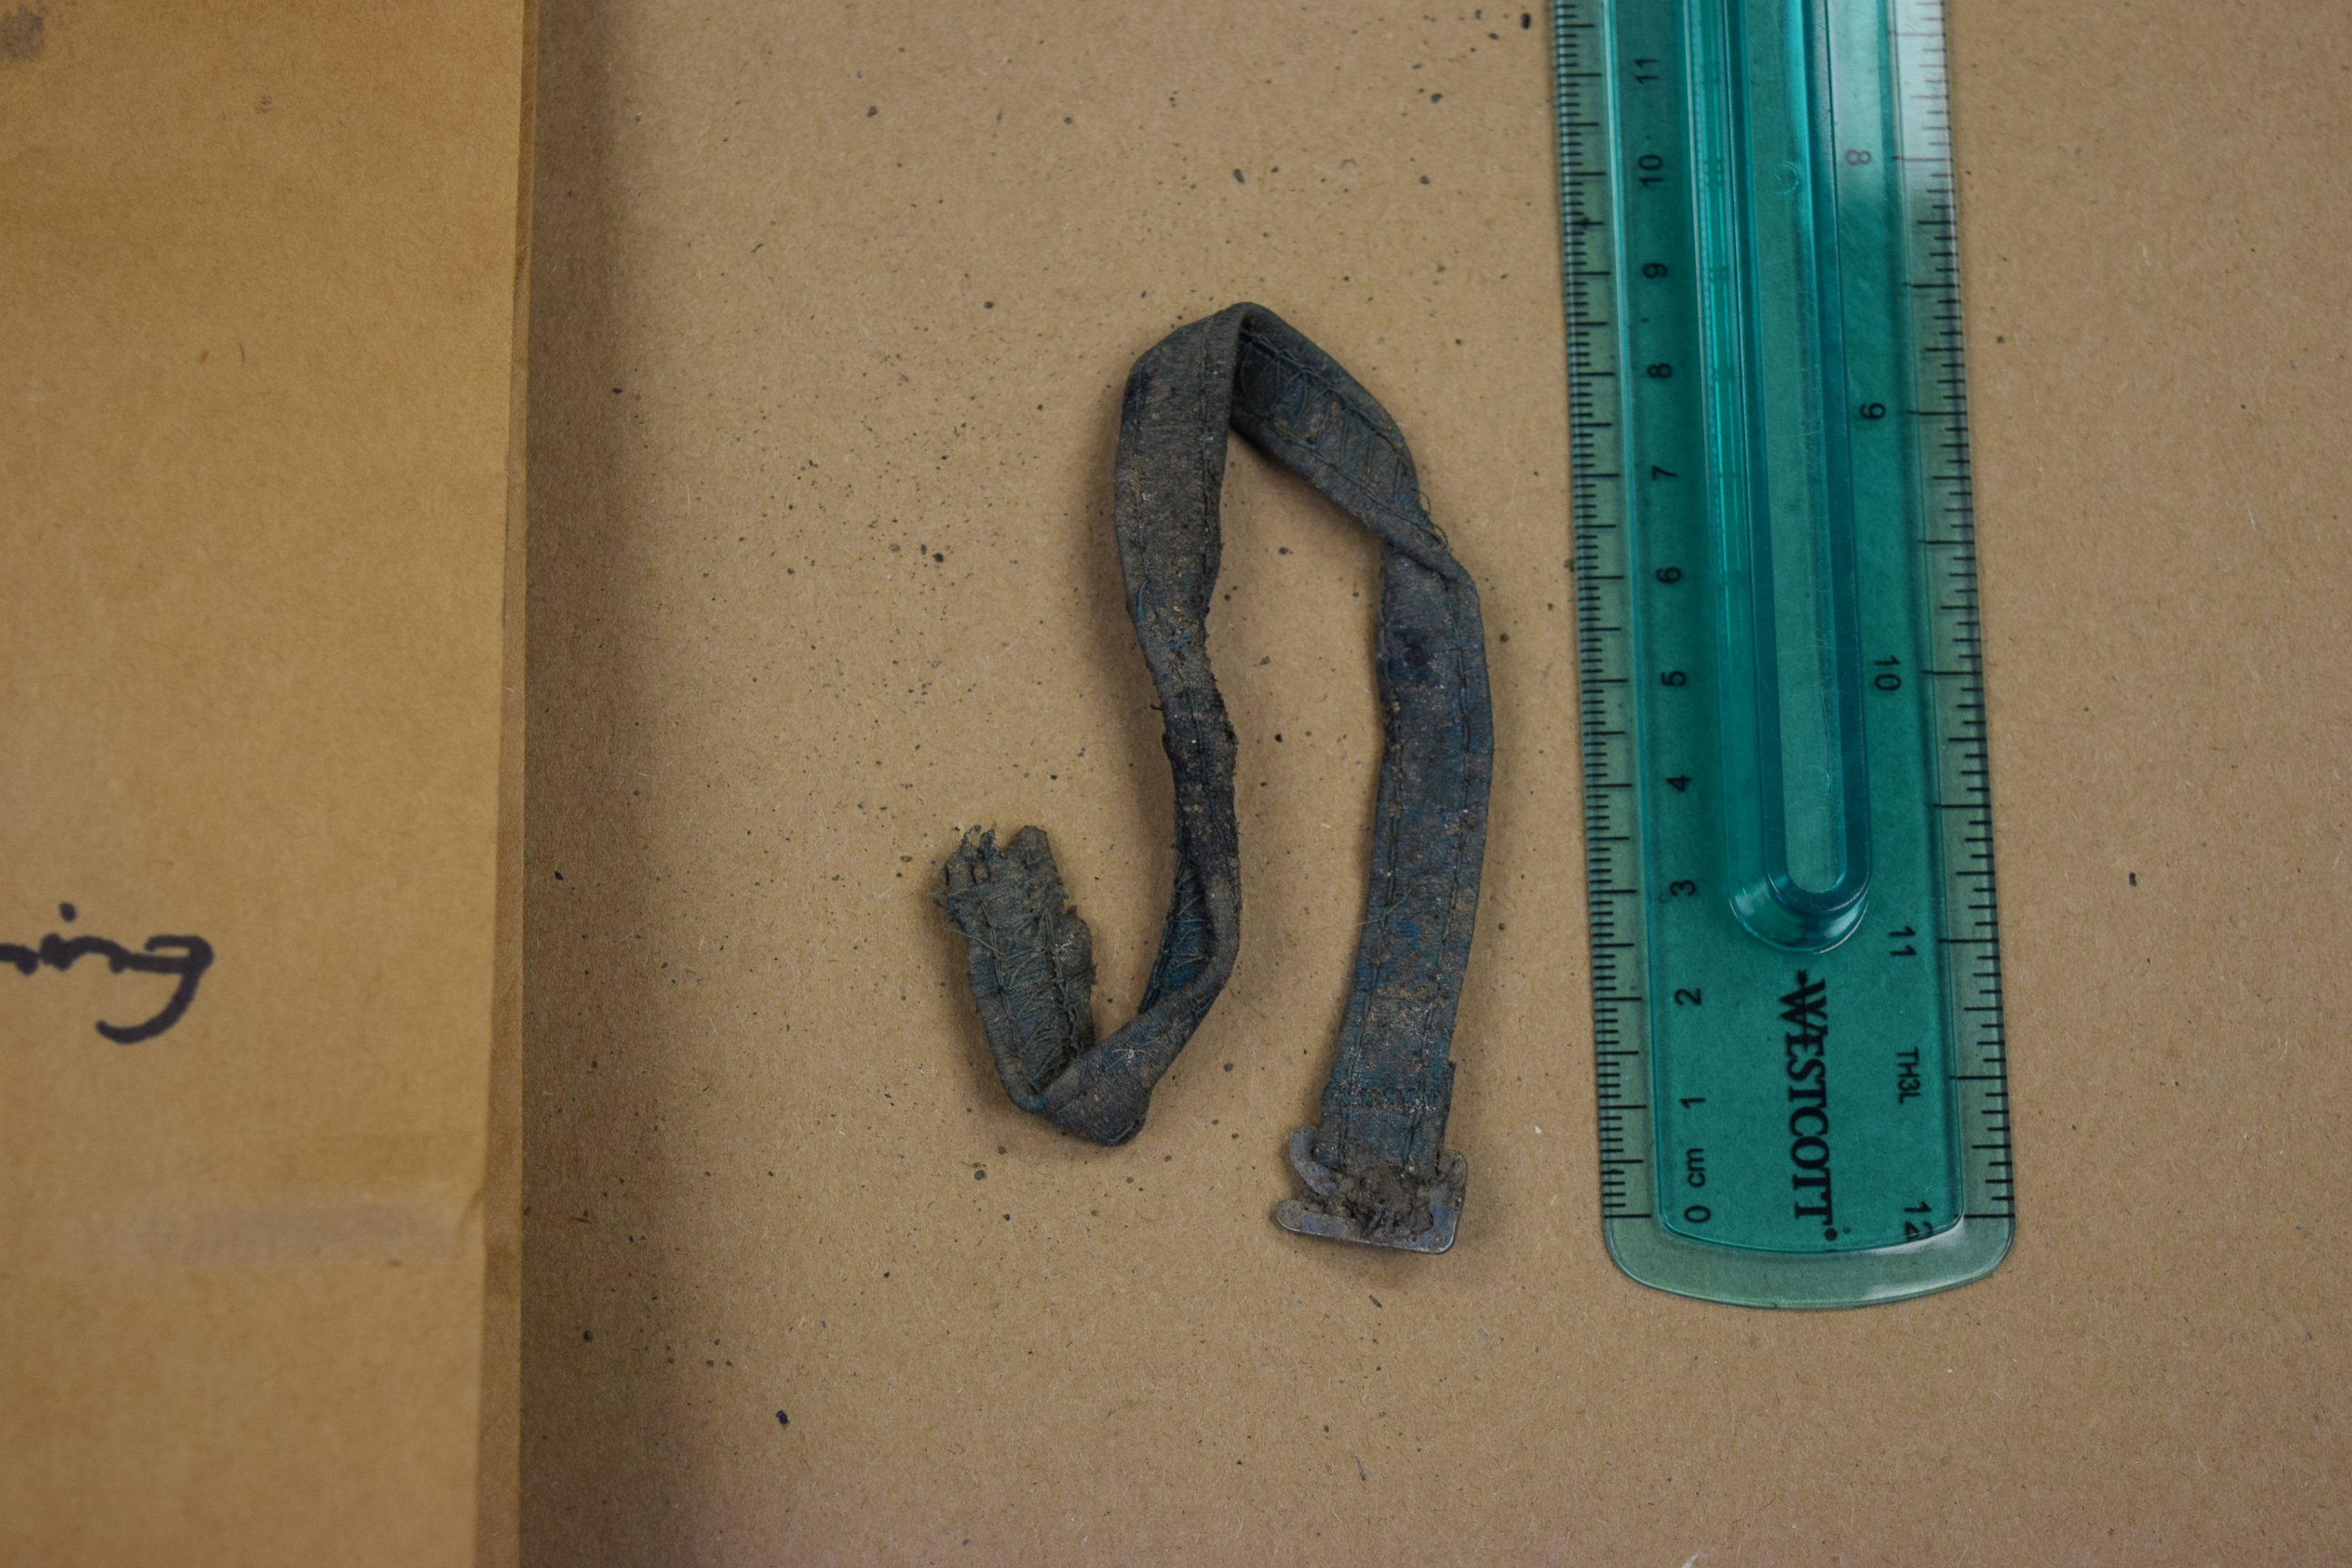 PHOTO: Cal Harris's defense team say they hope to present new evidence at the fourth trial, including this strap found in an outdoor burn pit at a house located a few miles from the Harris home in upstate New York.